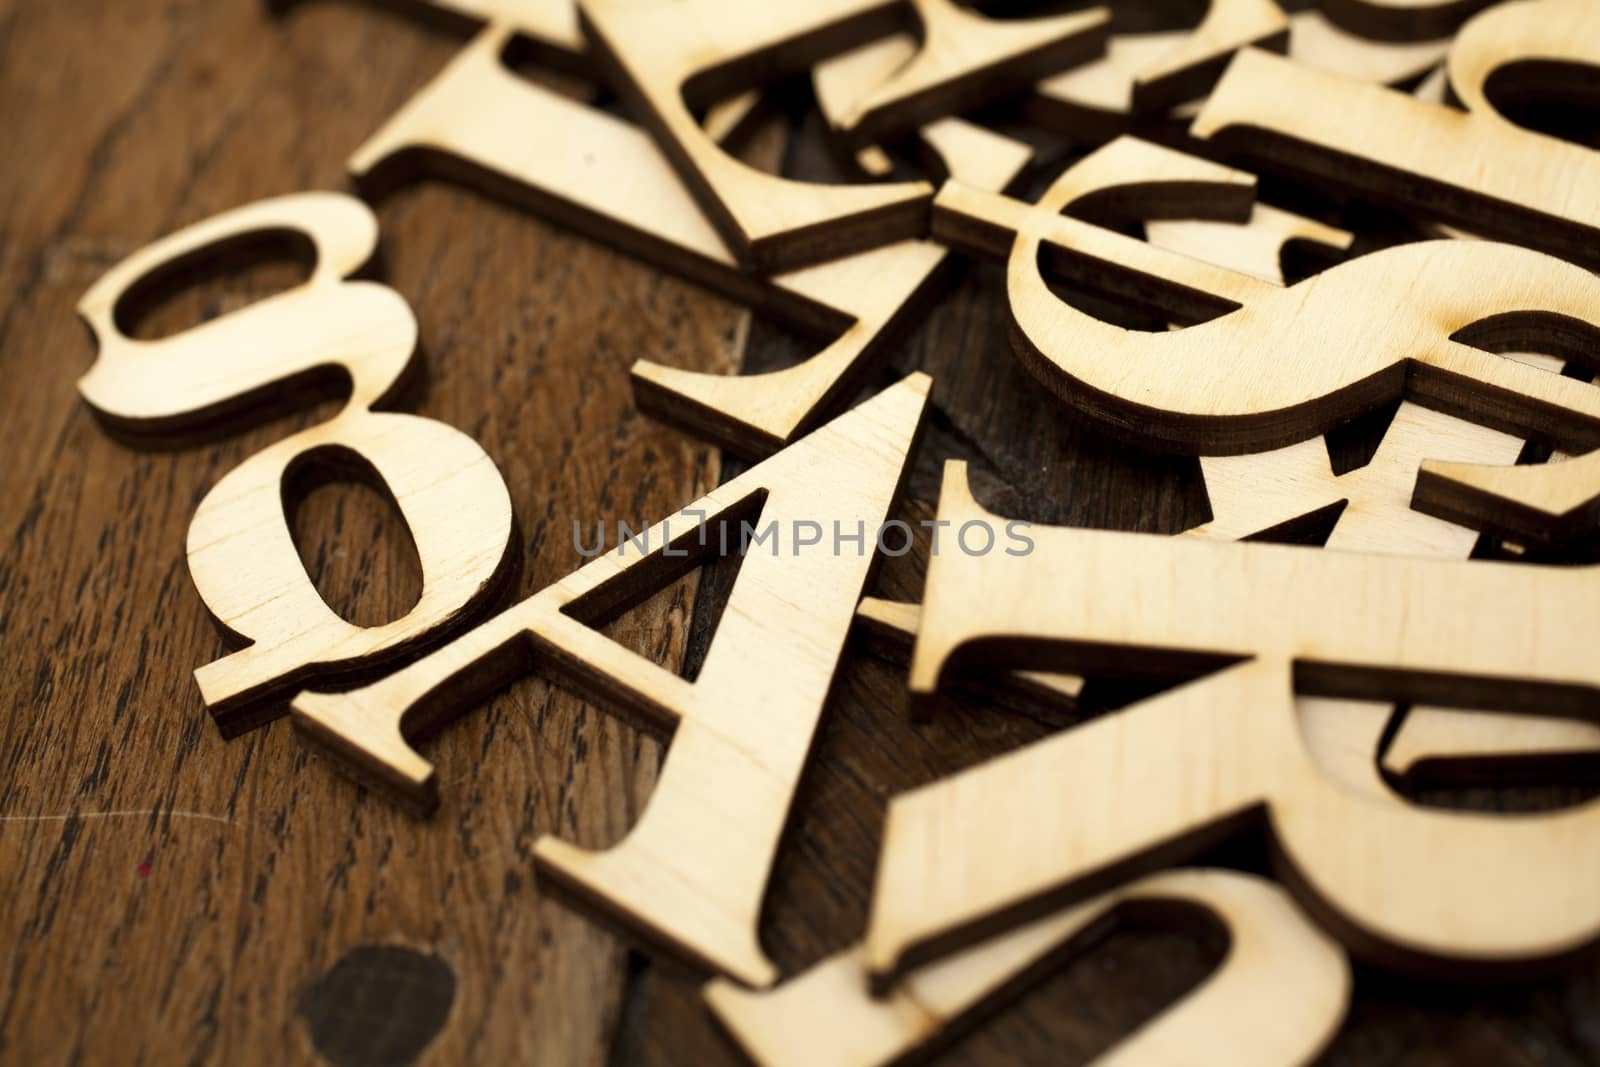 Wooden alphabet letters on old wooden surface